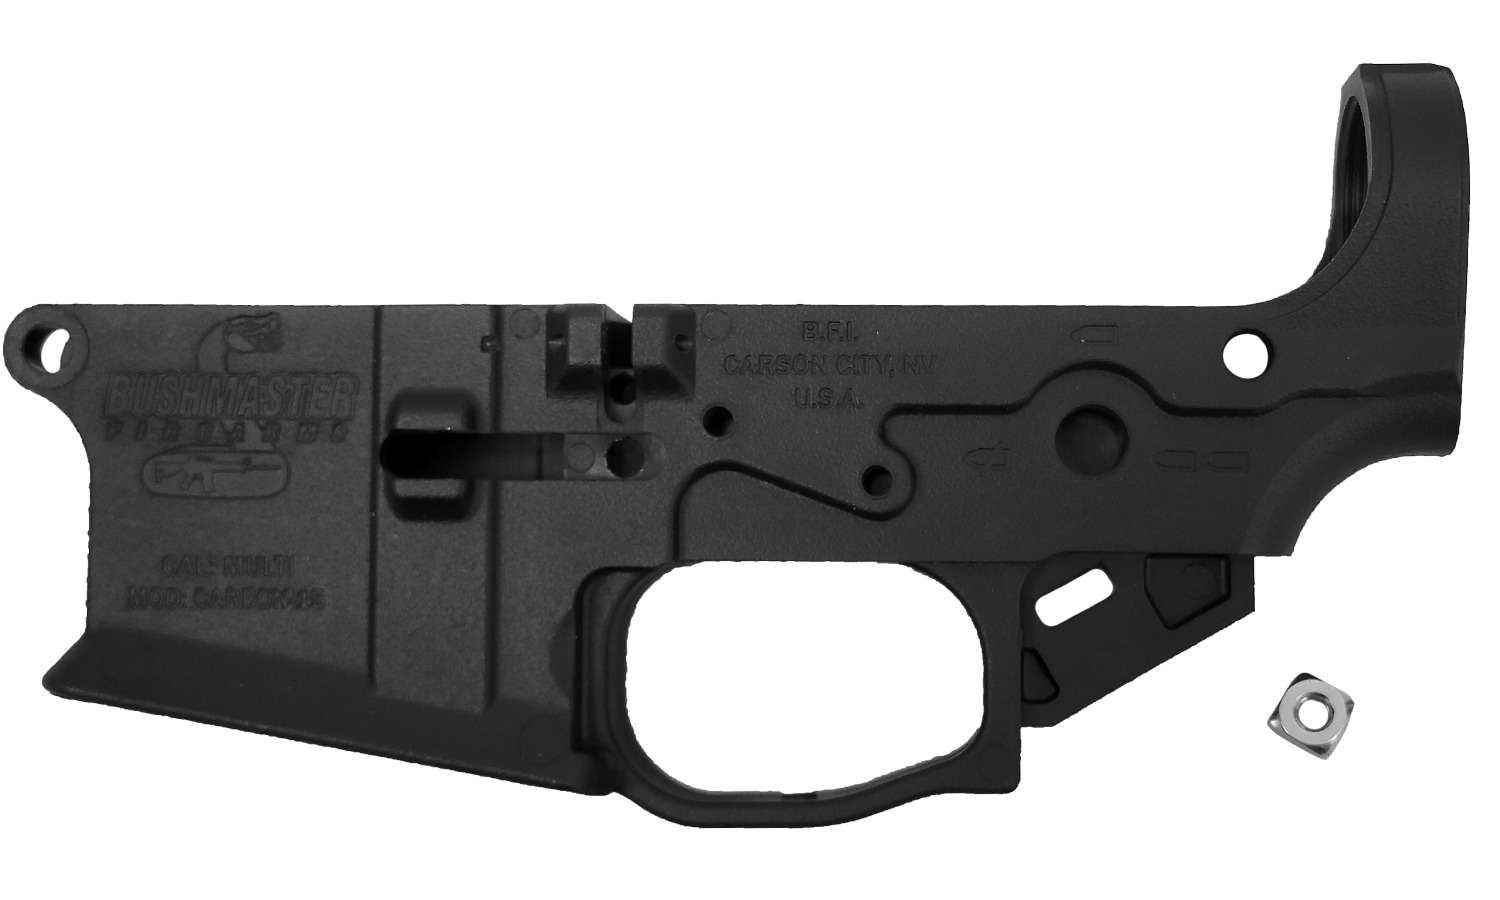 Bushmaster CARBON-15 Stripped AR15 Lower Receiver - Black | Firearms ...